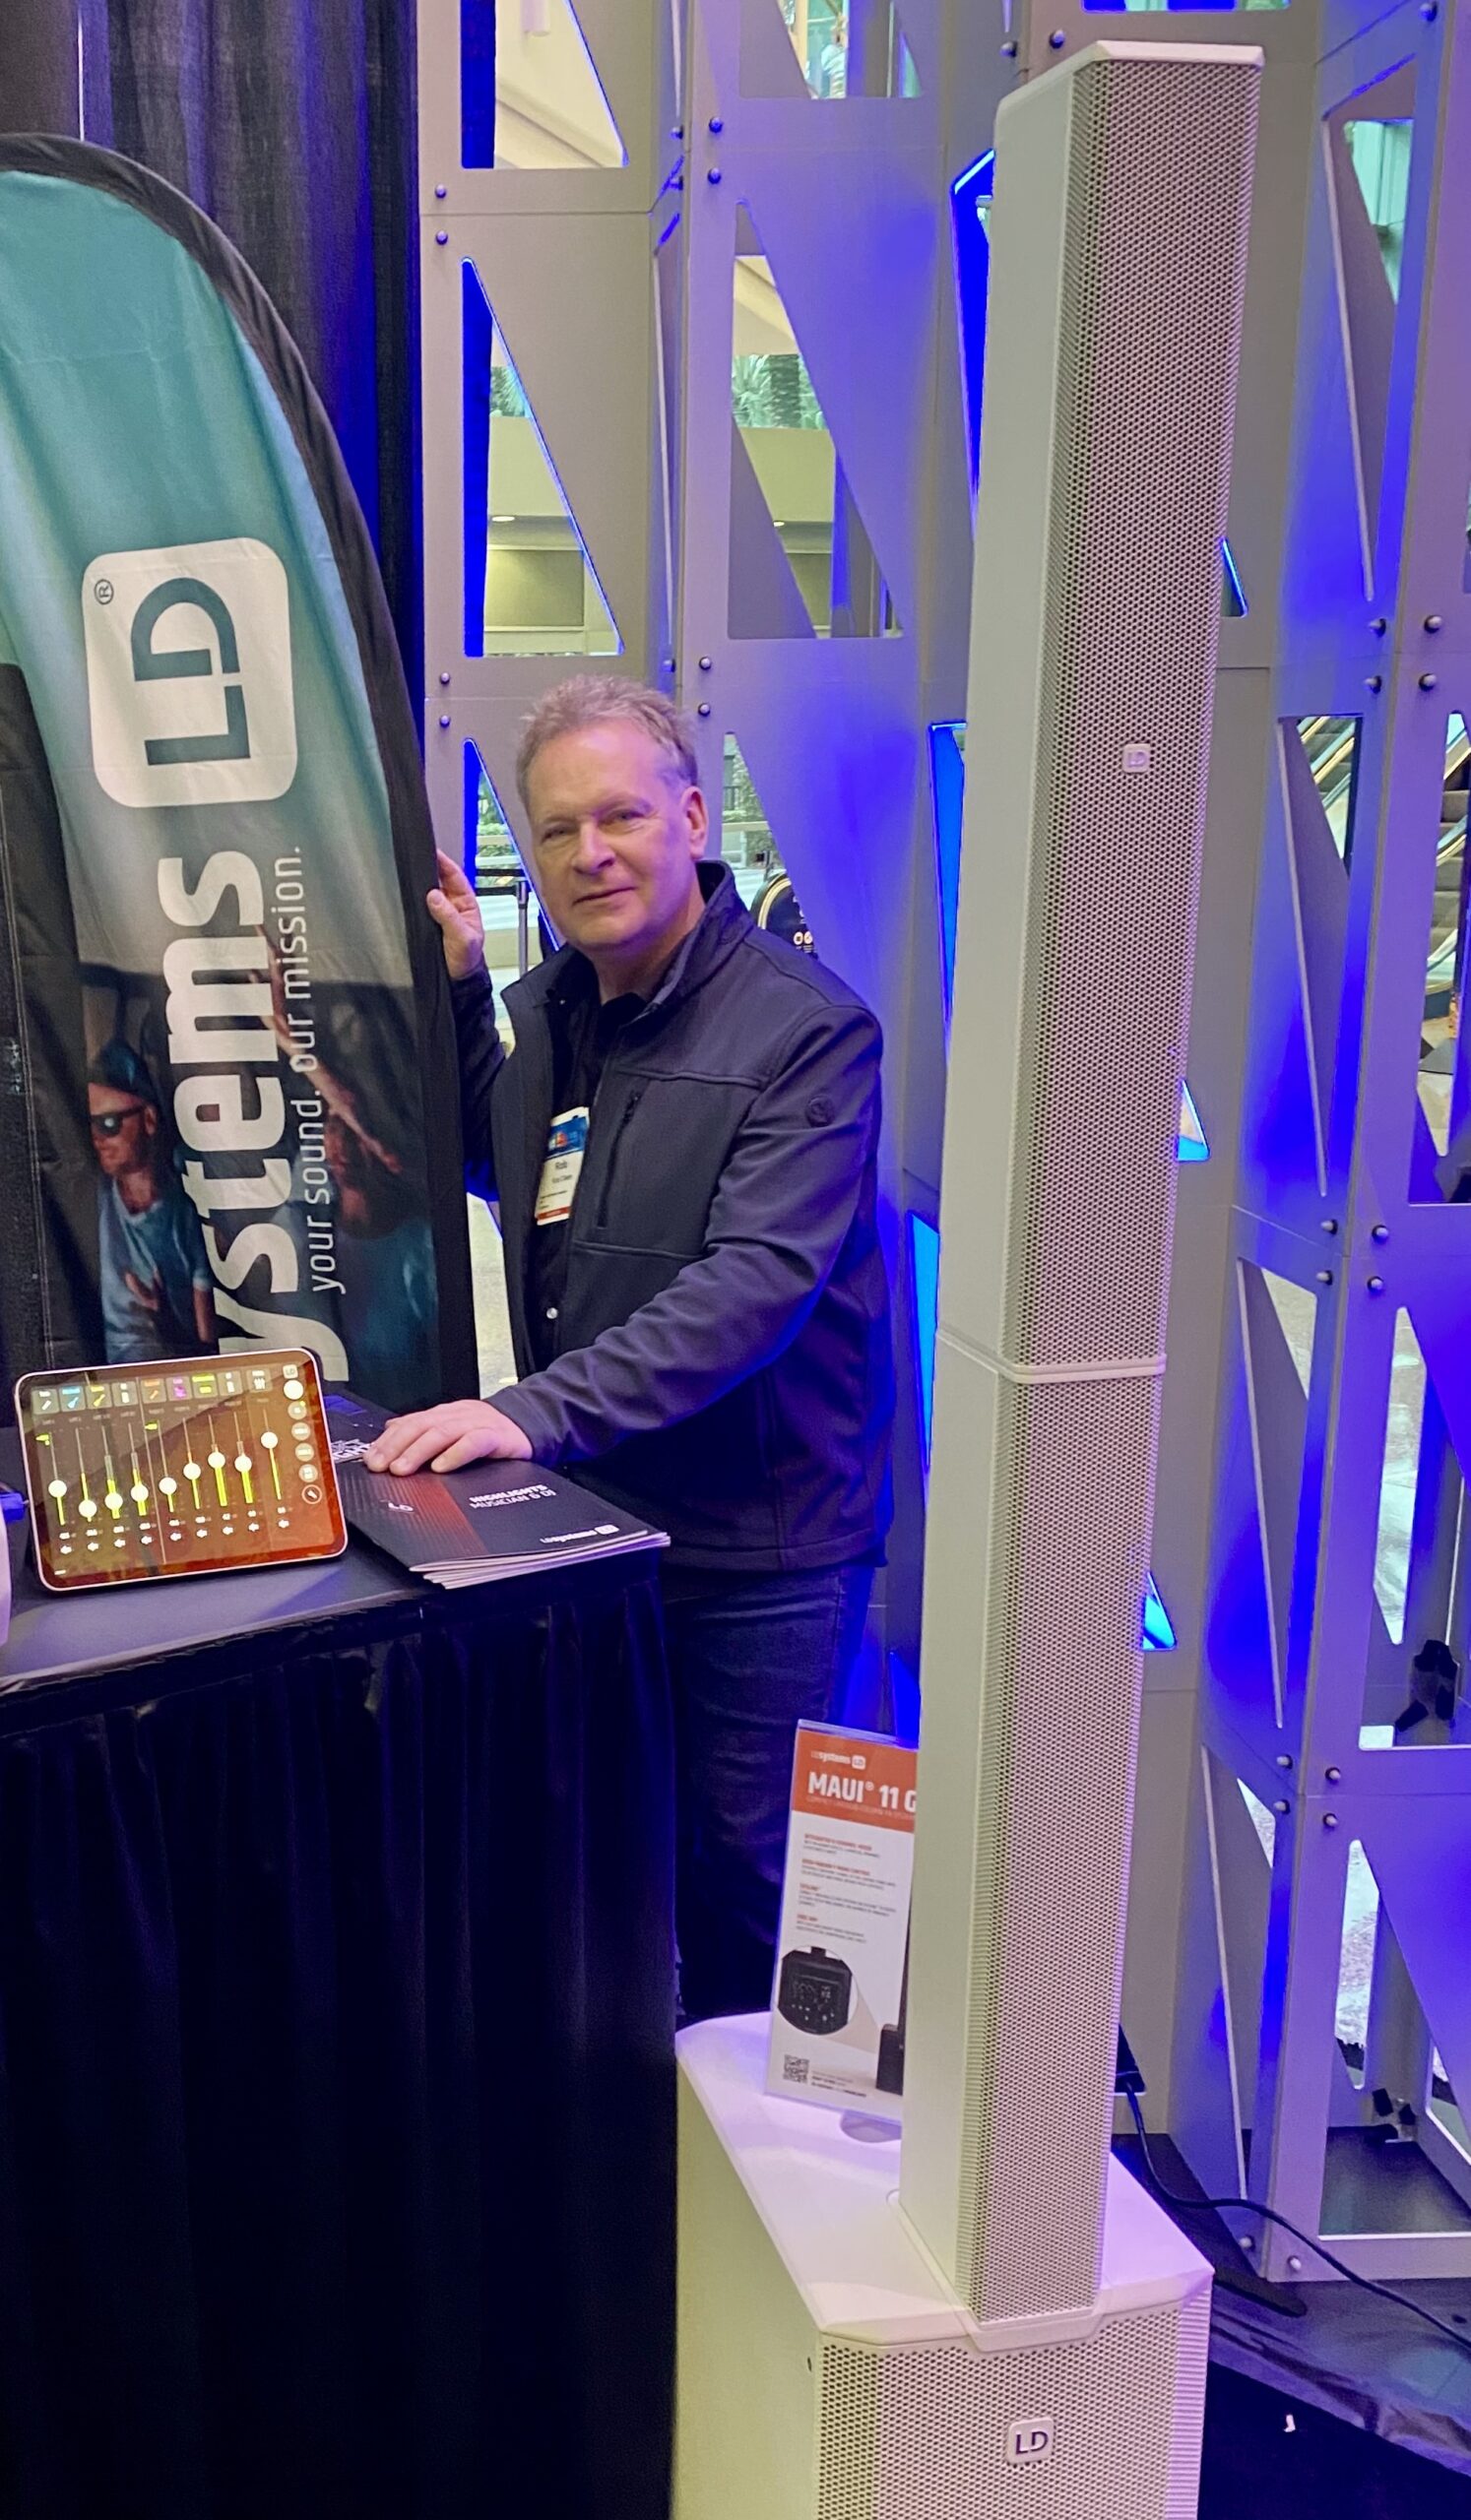 Adam Hall Group may have a big demo room at the show, but that didn’t stop Rob Olsen, Sales director at Adam Hall North America, from taking its LD Systems MAUI 11 G3 MIX column PA systems out to the annual Media Day event before the show opened.